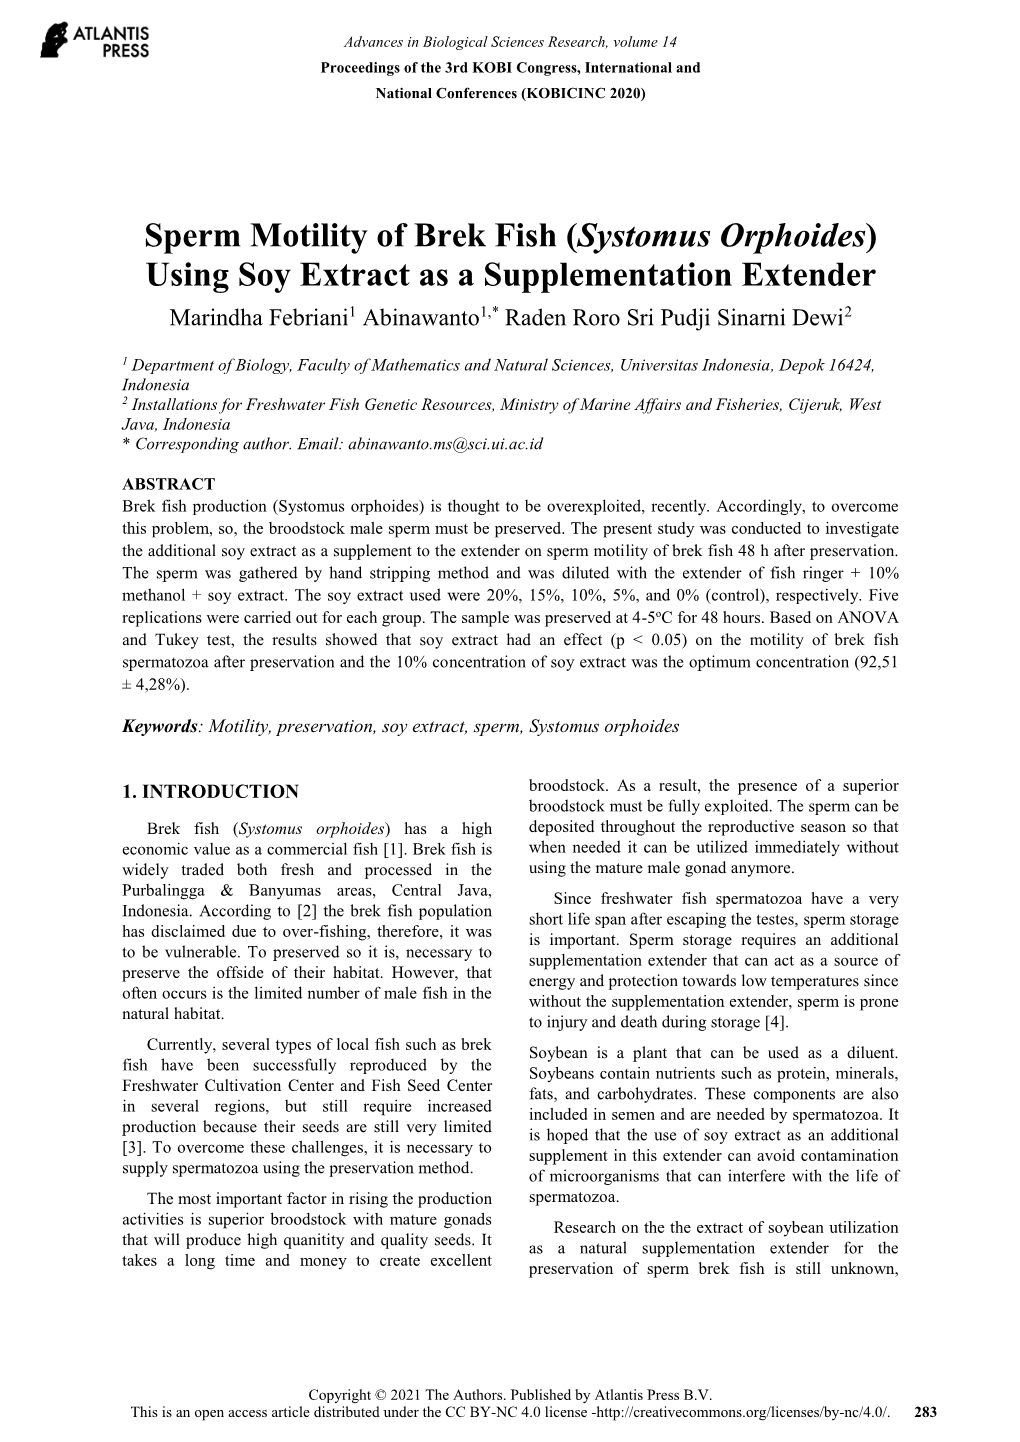 Systomus Orphoides) Using Soy Extract As a Supplementation Extender Marindha Febriani1 Abinawanto1,* Raden Roro Sri Pudji Sinarni Dewi2